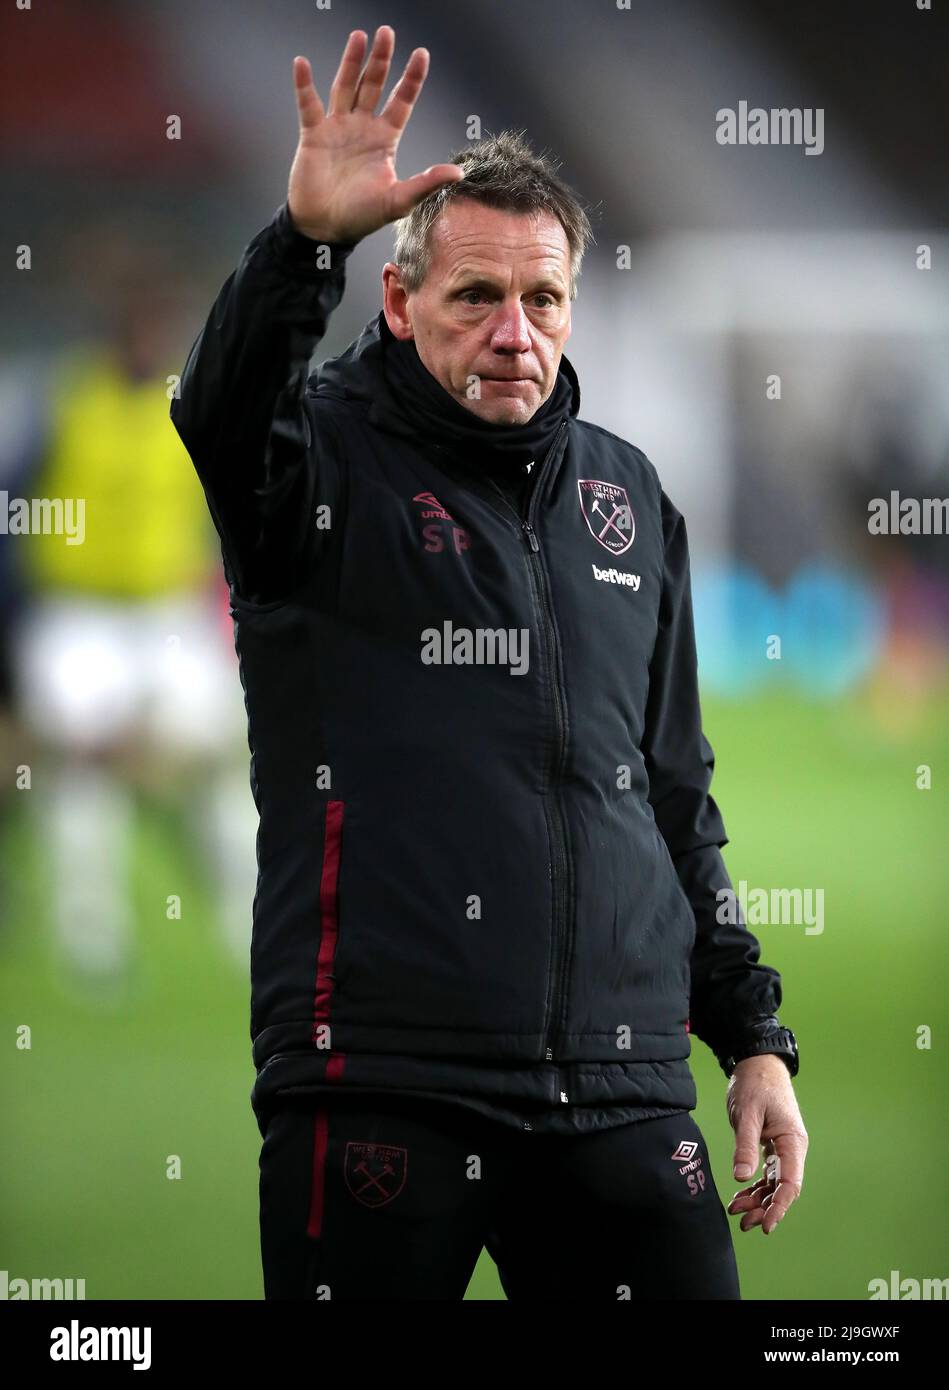 File photo dated 05-04-2021 of Stuart Pearce. West Ham have announced the departure of first-team coach Stuart Pearce. Pearce returned to the London club to work alongside manager David Moyes in August 2020 having had a previous spell in the role during the 2017-18 season. Issue date: Monday April 5, 2021. Issue date: Monday May 23, 2022. Stock Photo